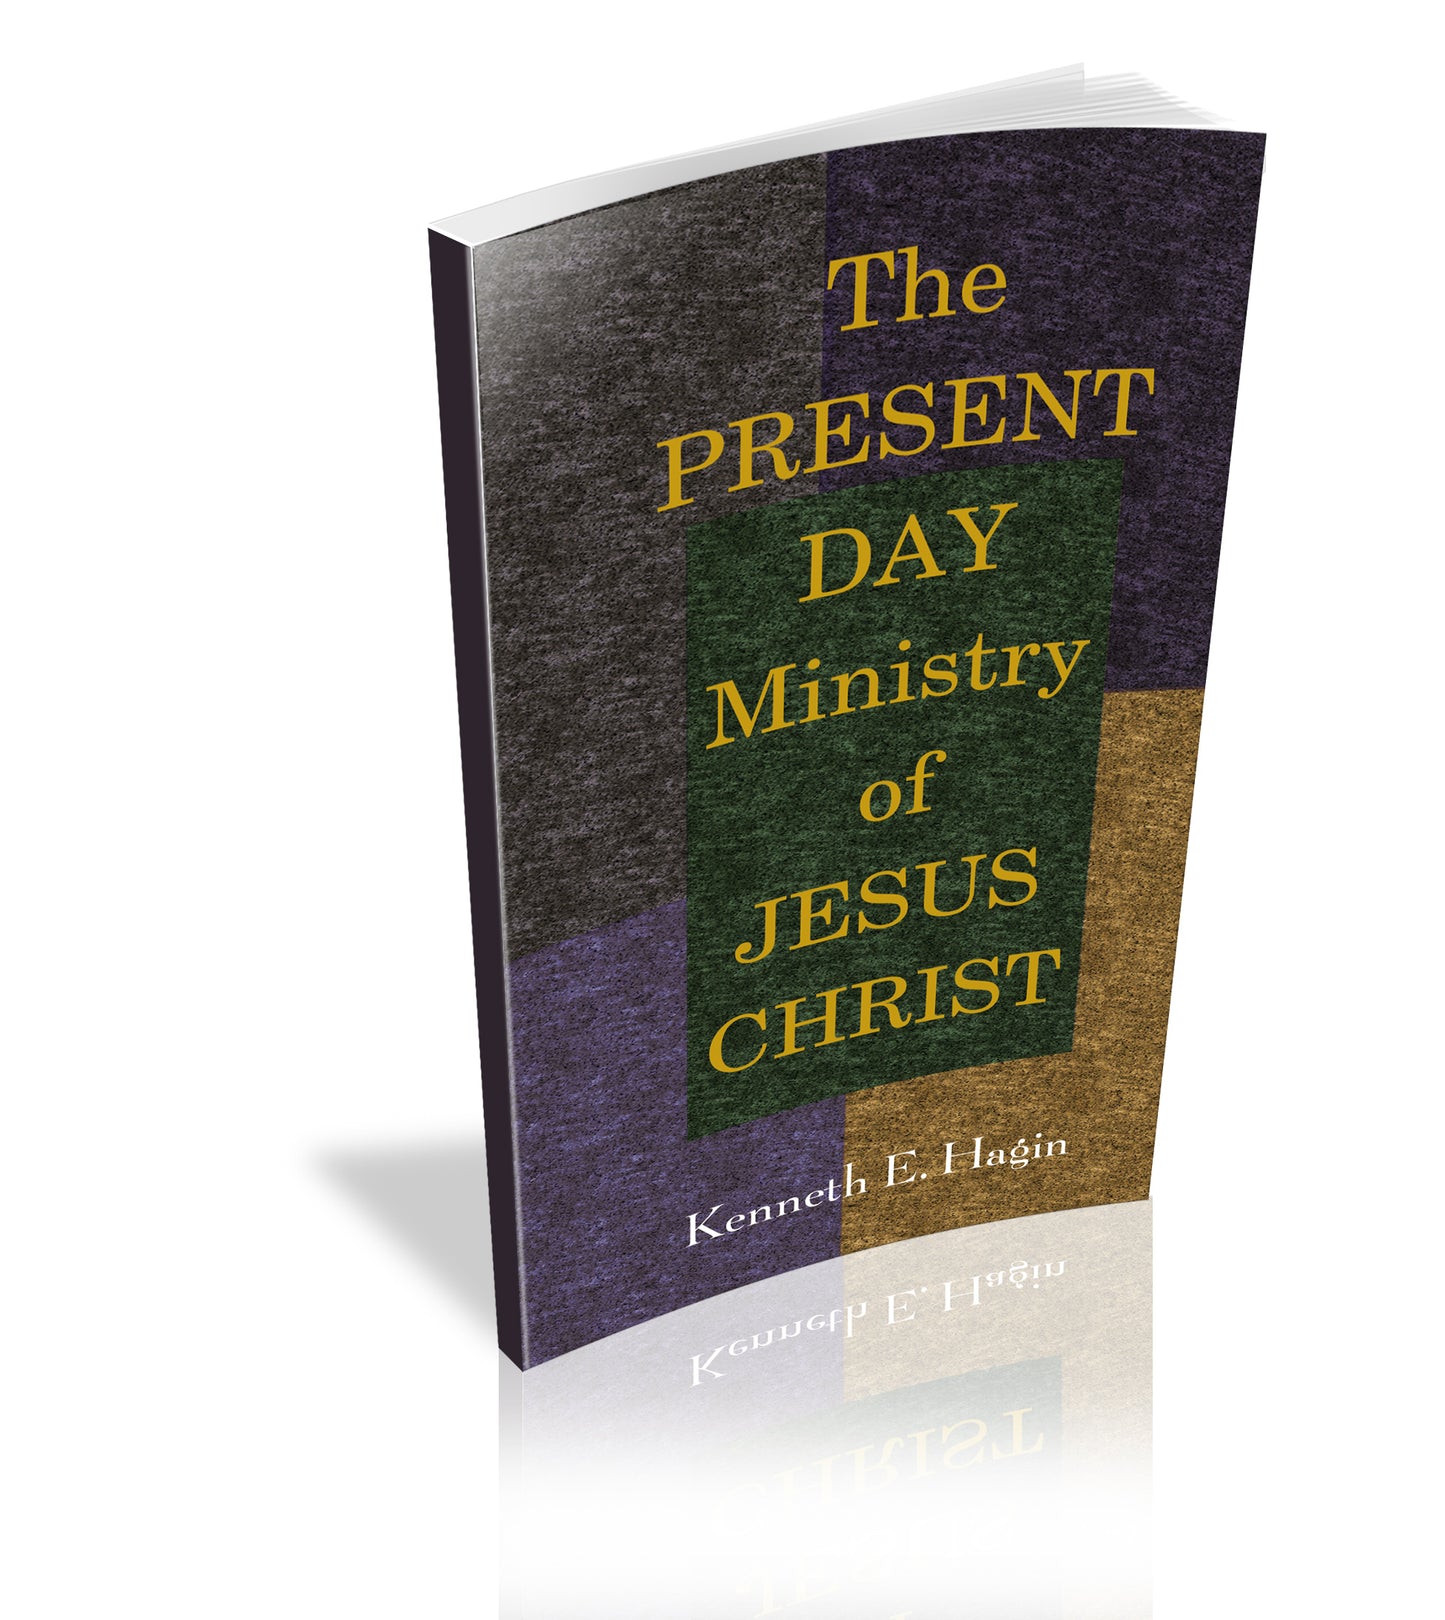 The Present-Day Ministry of Jesus Christ